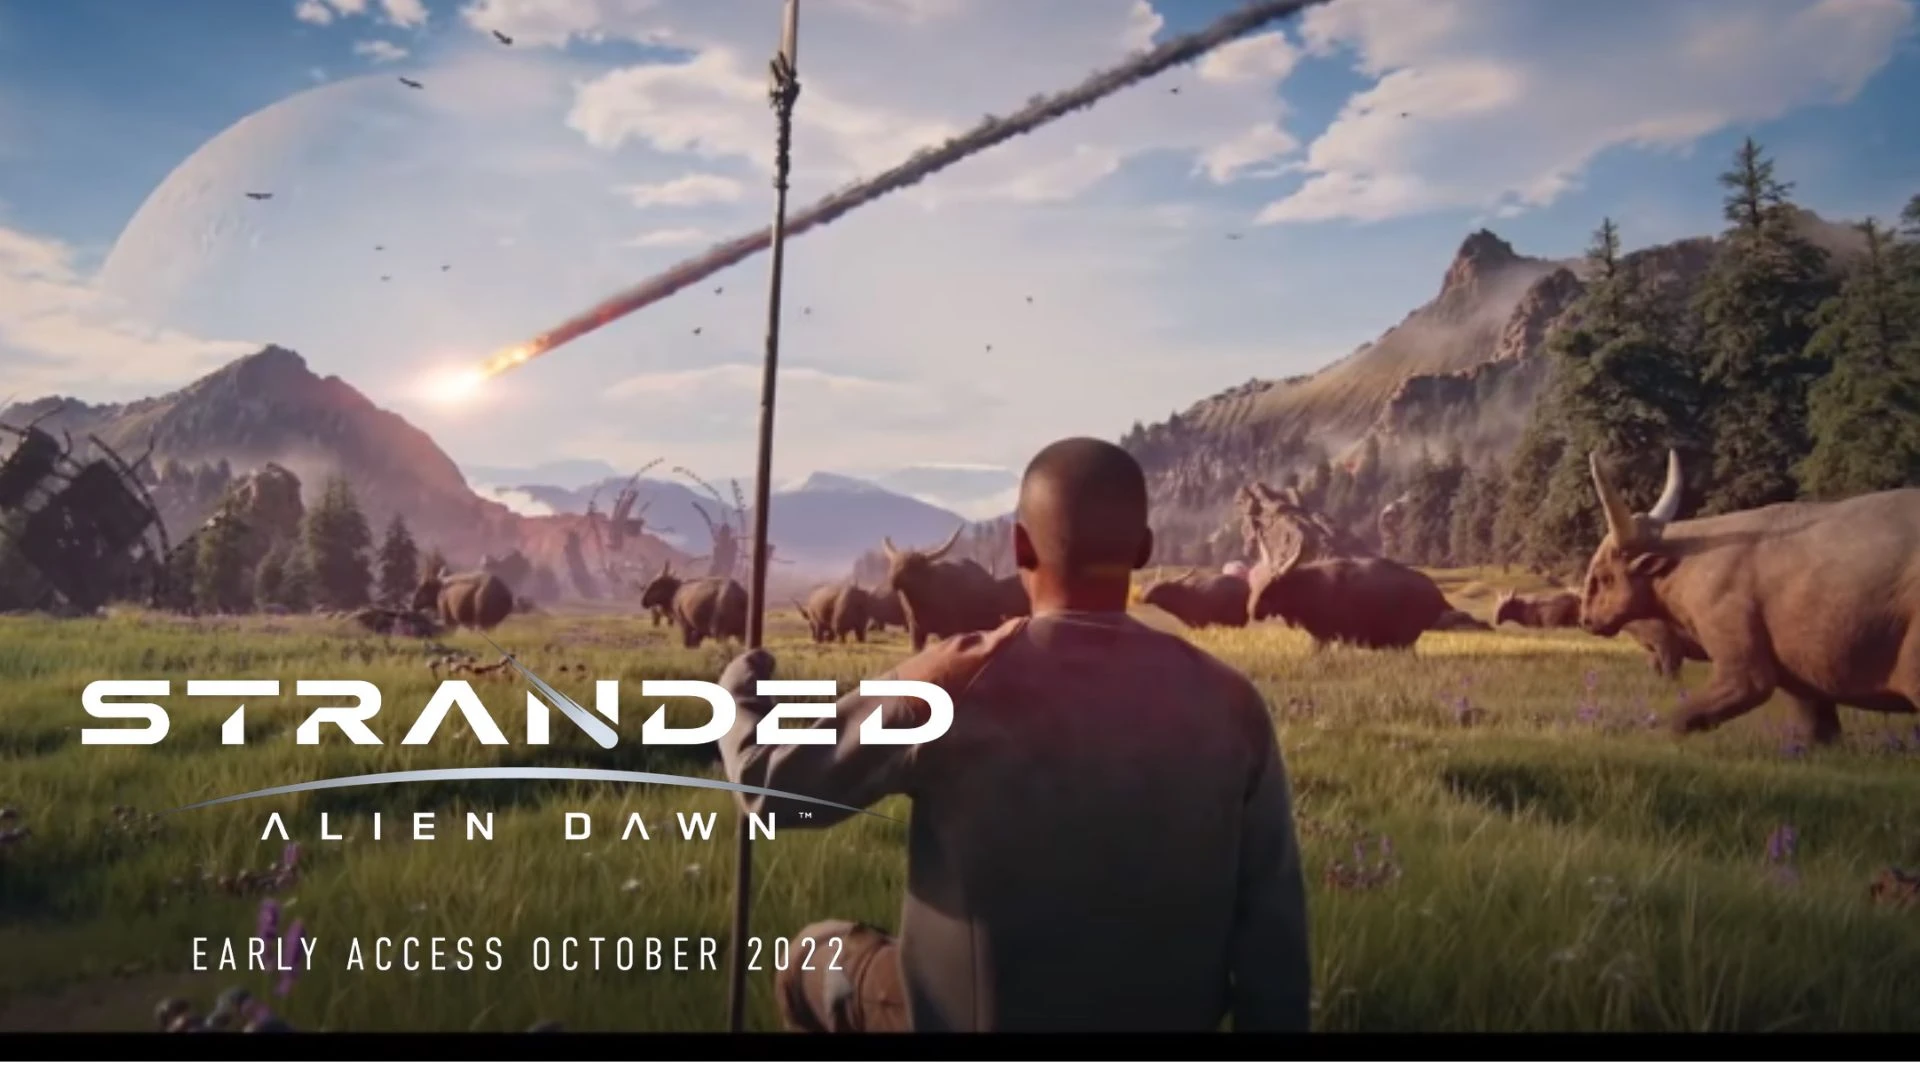 Stranded: Alien Dawn Parents Guide and Age Rating (2022)